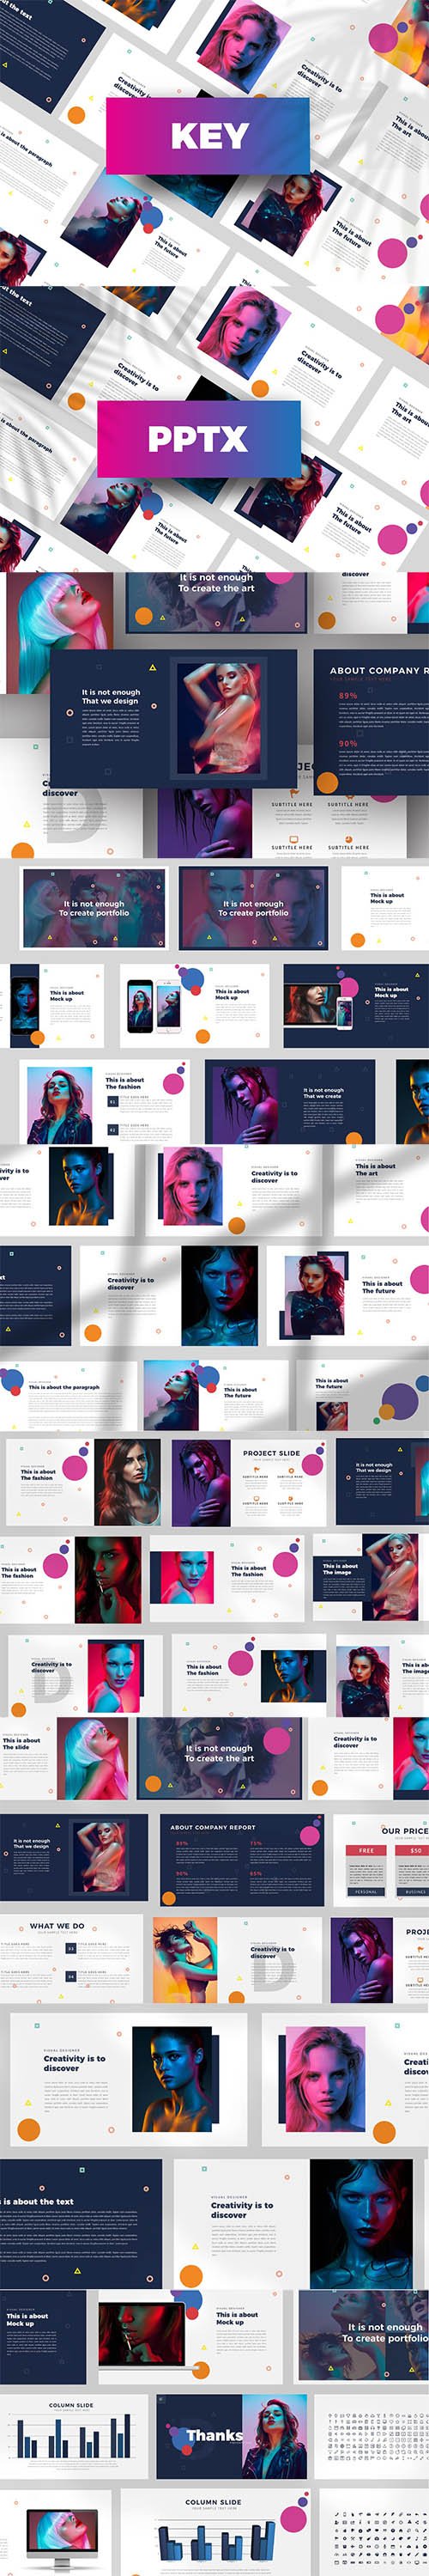 Design Agency Powerpoint and Keynote Templates